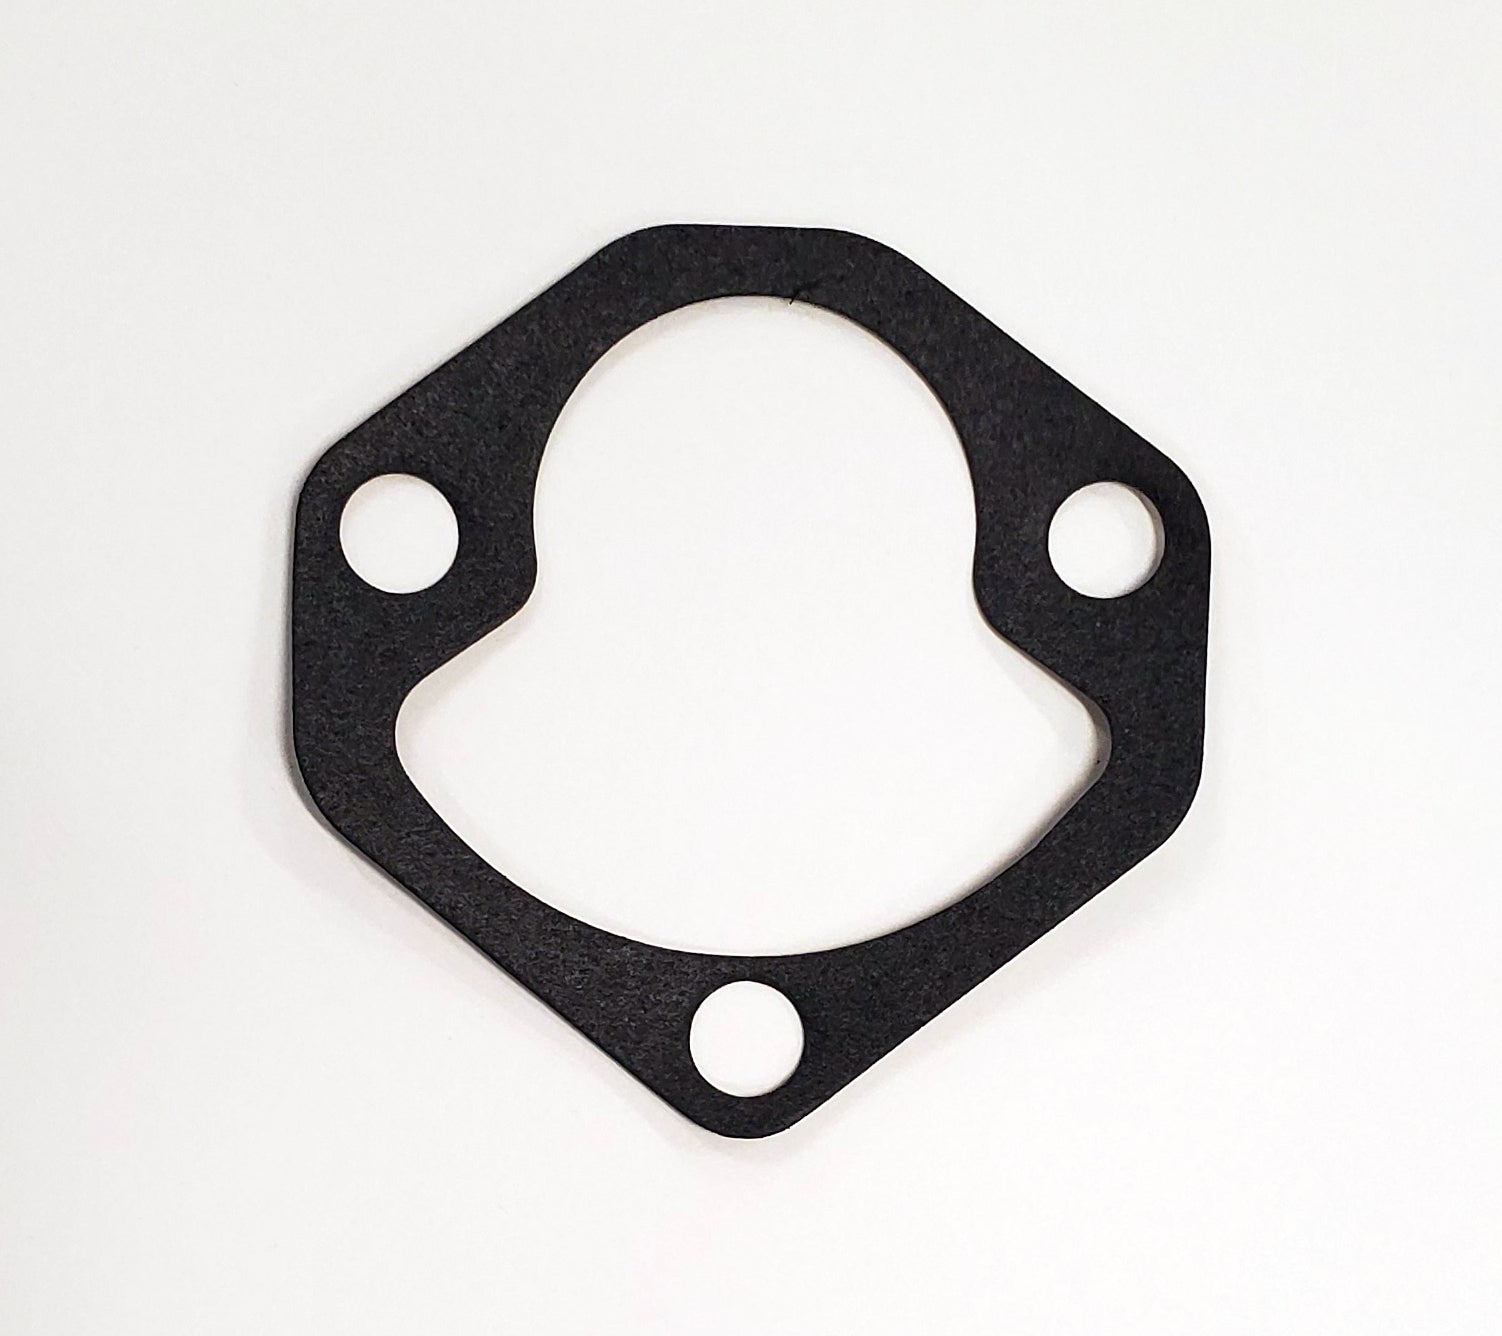 Borgeson Side / Top cover gasket 5666734 for Saginaw 525 series manual steering gears. S5666734